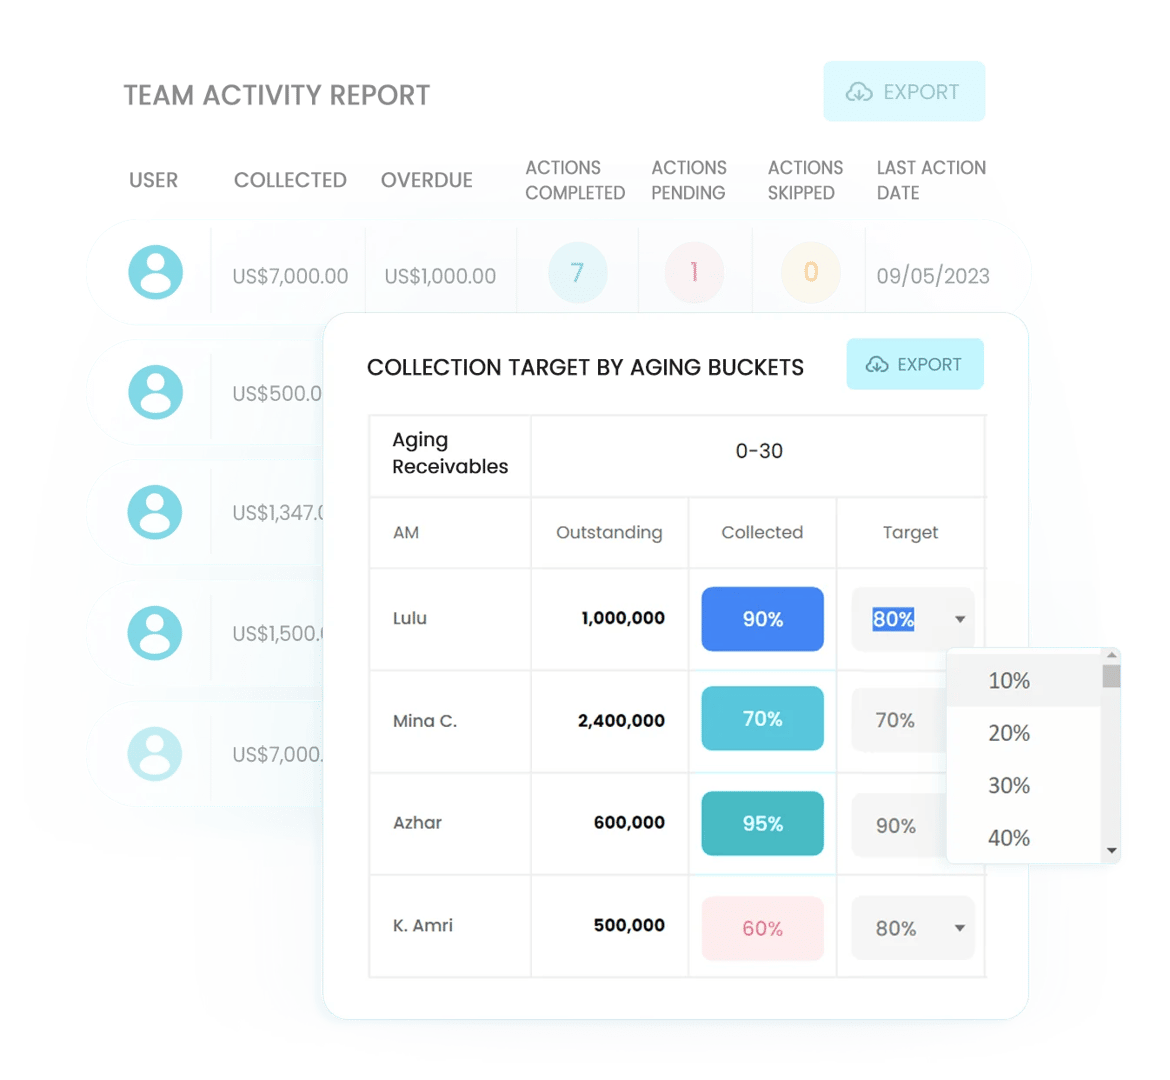 Track collections KPIs from the "Team Activity Report"